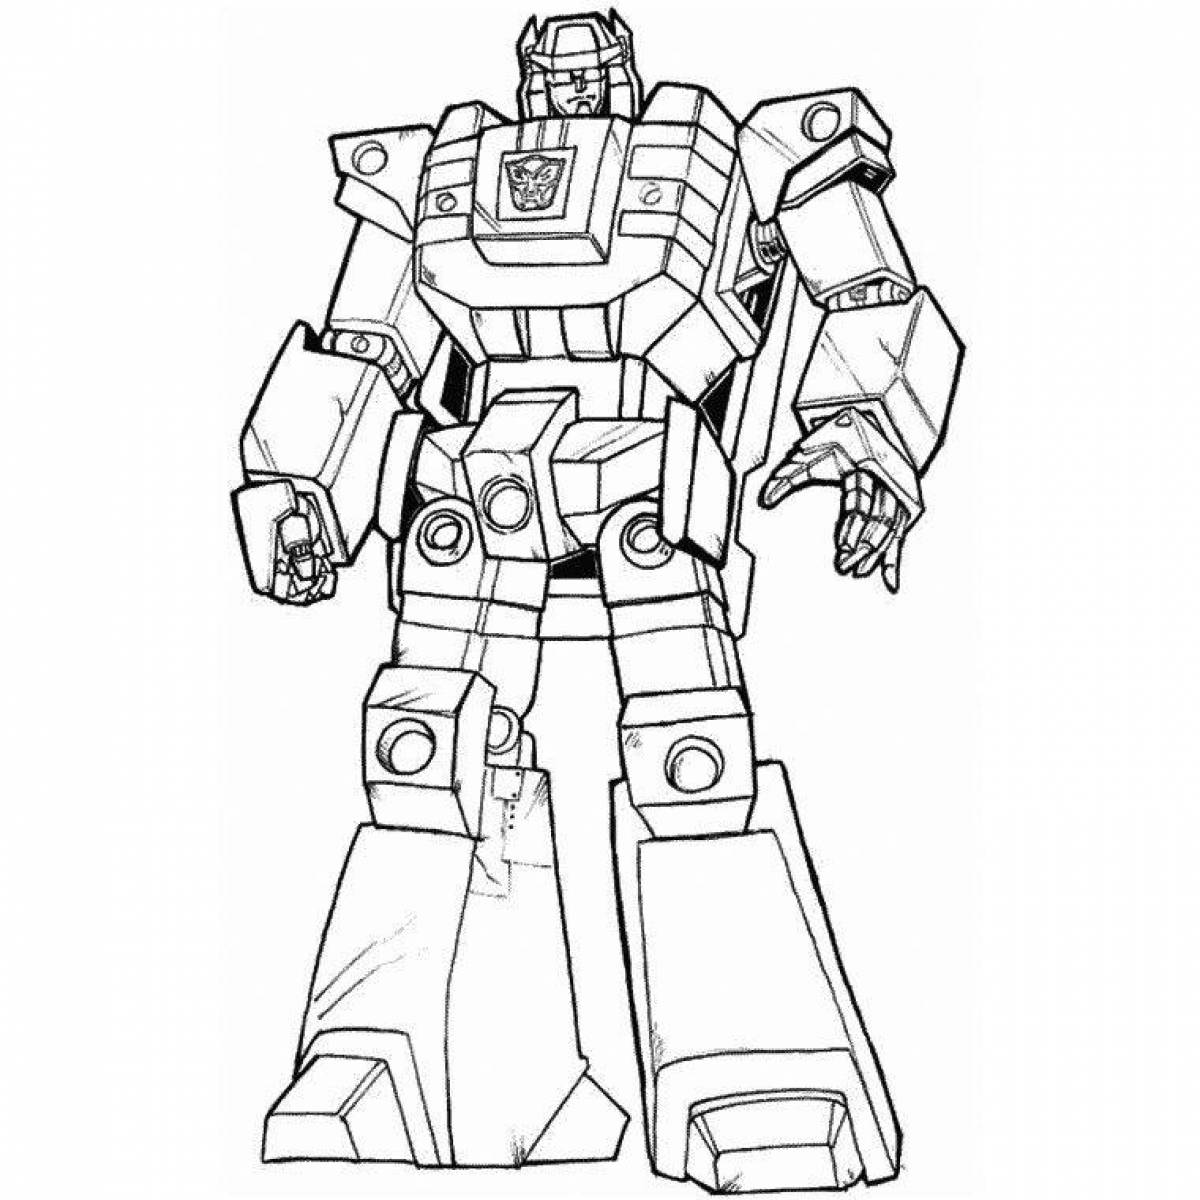 Coloring page awesome transforming robot